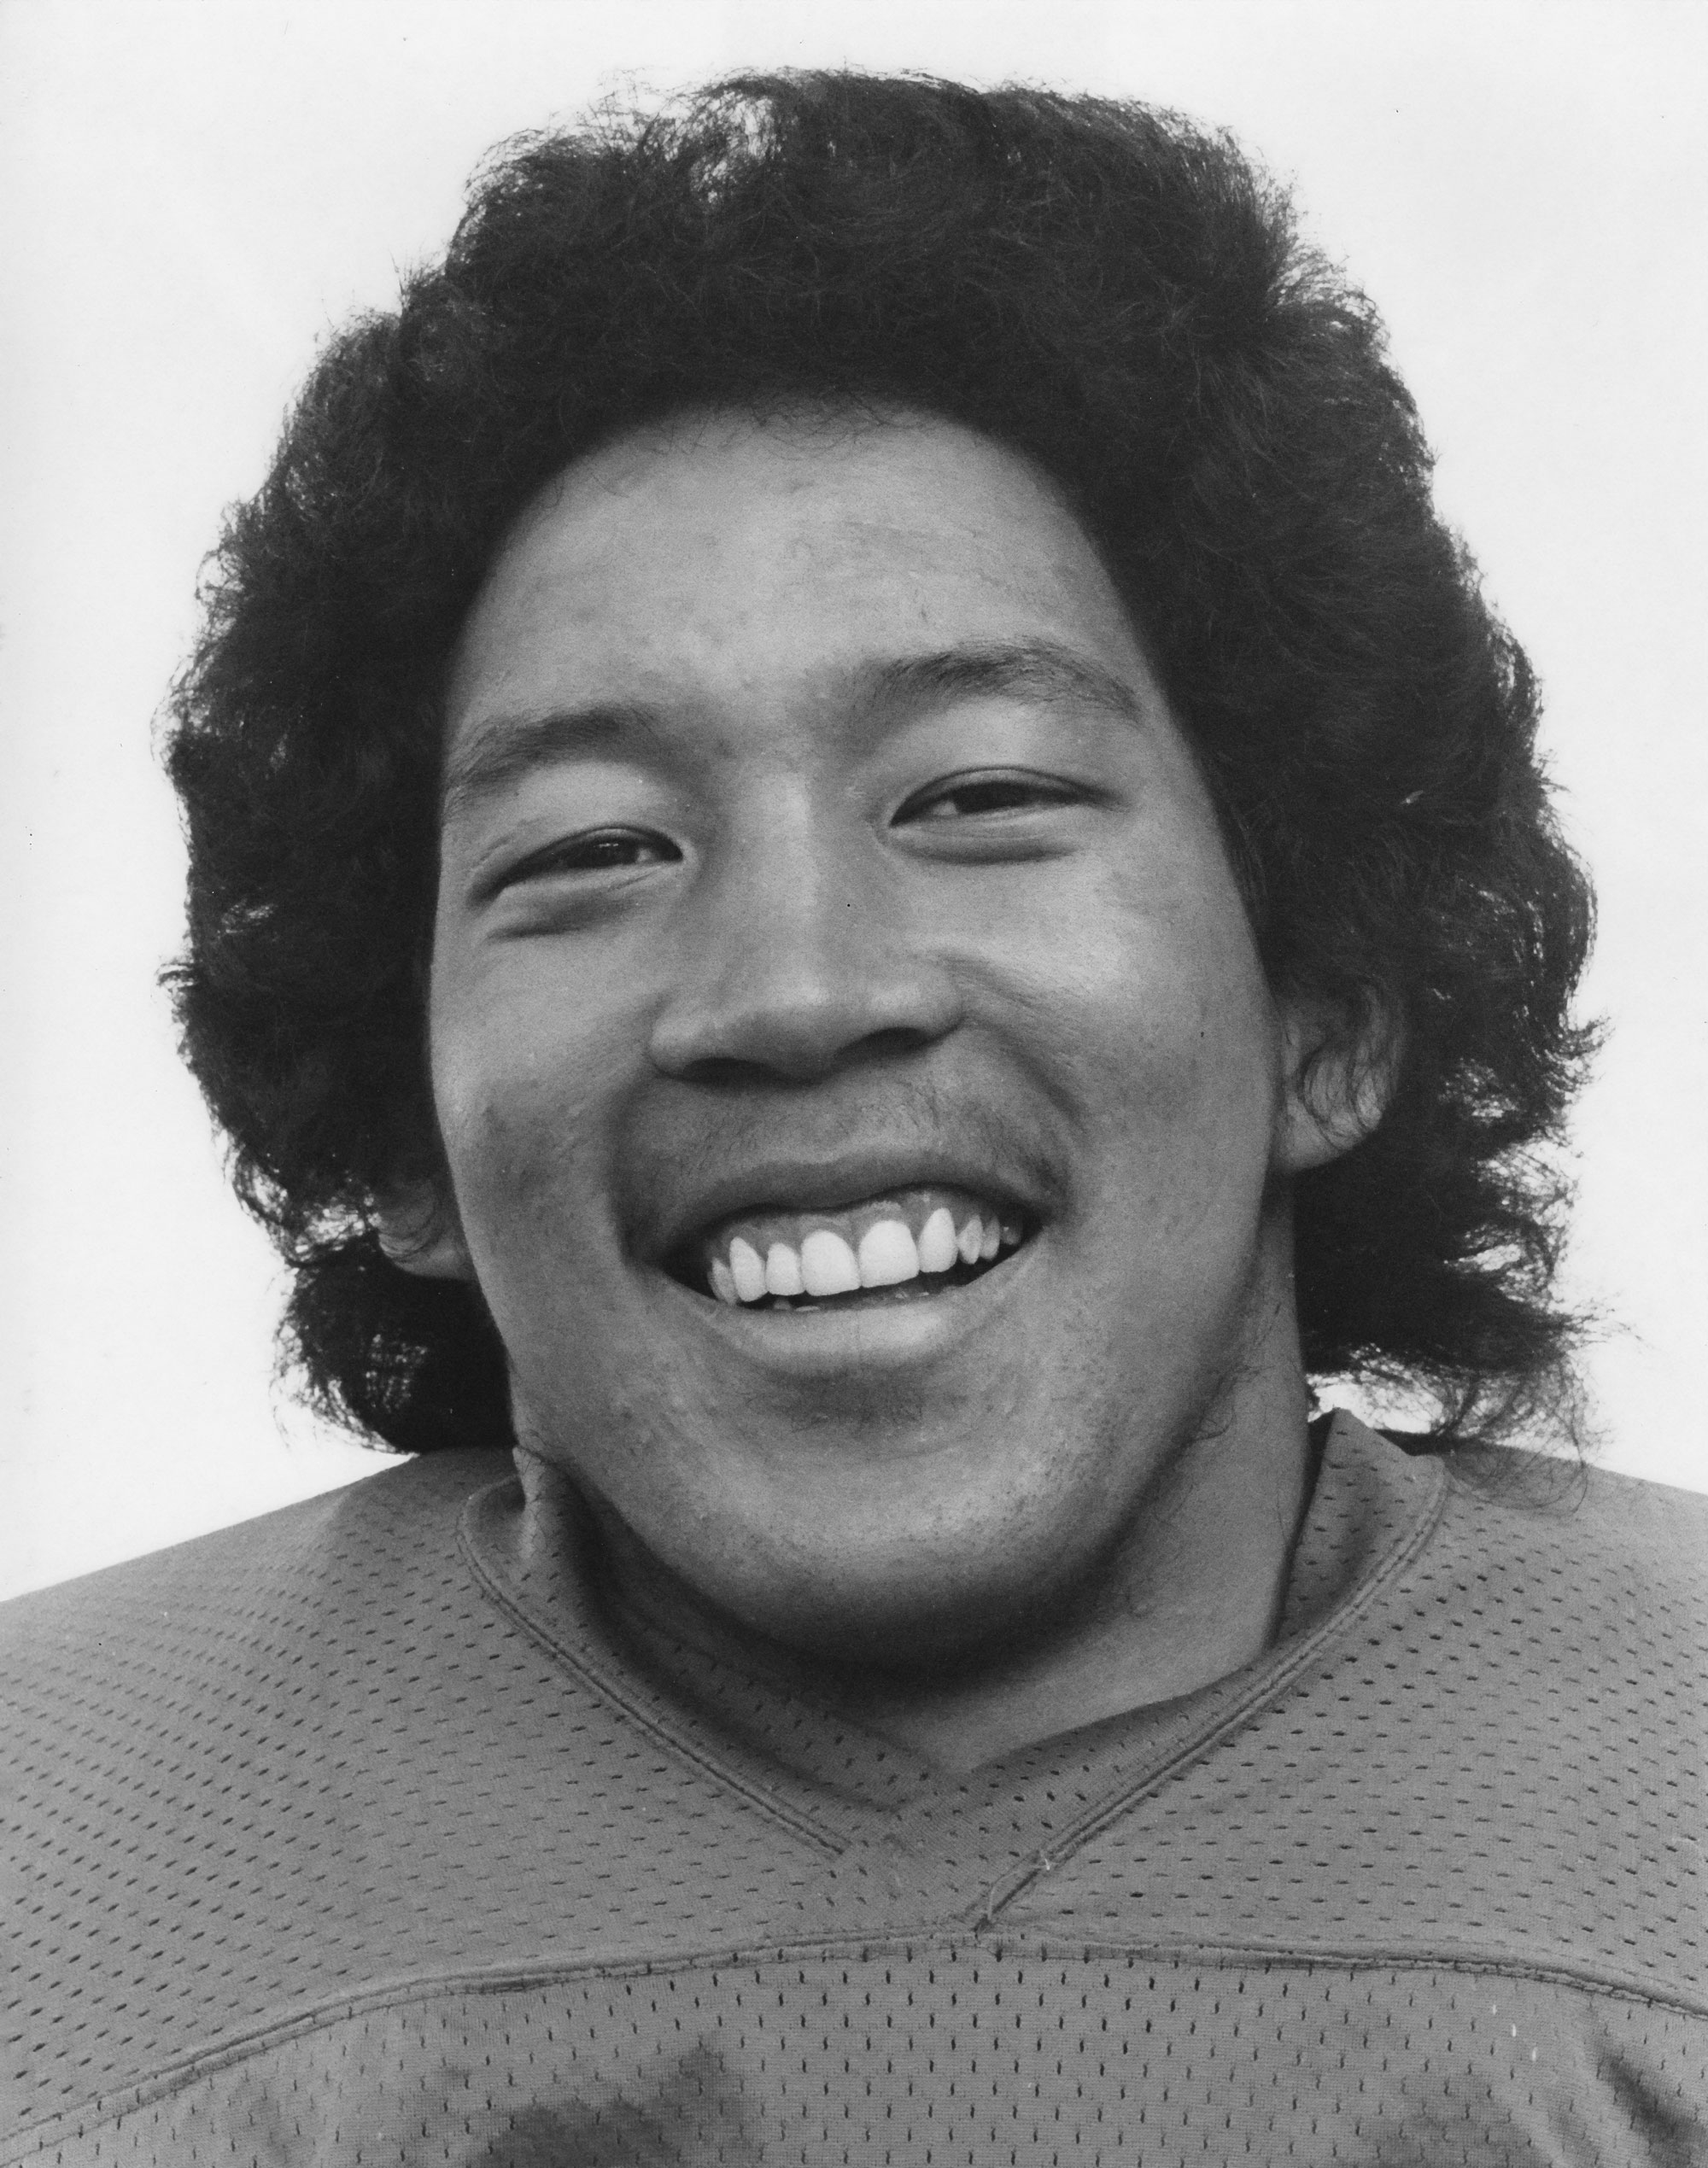 Black and white photograph of a man in a football uniform smiling